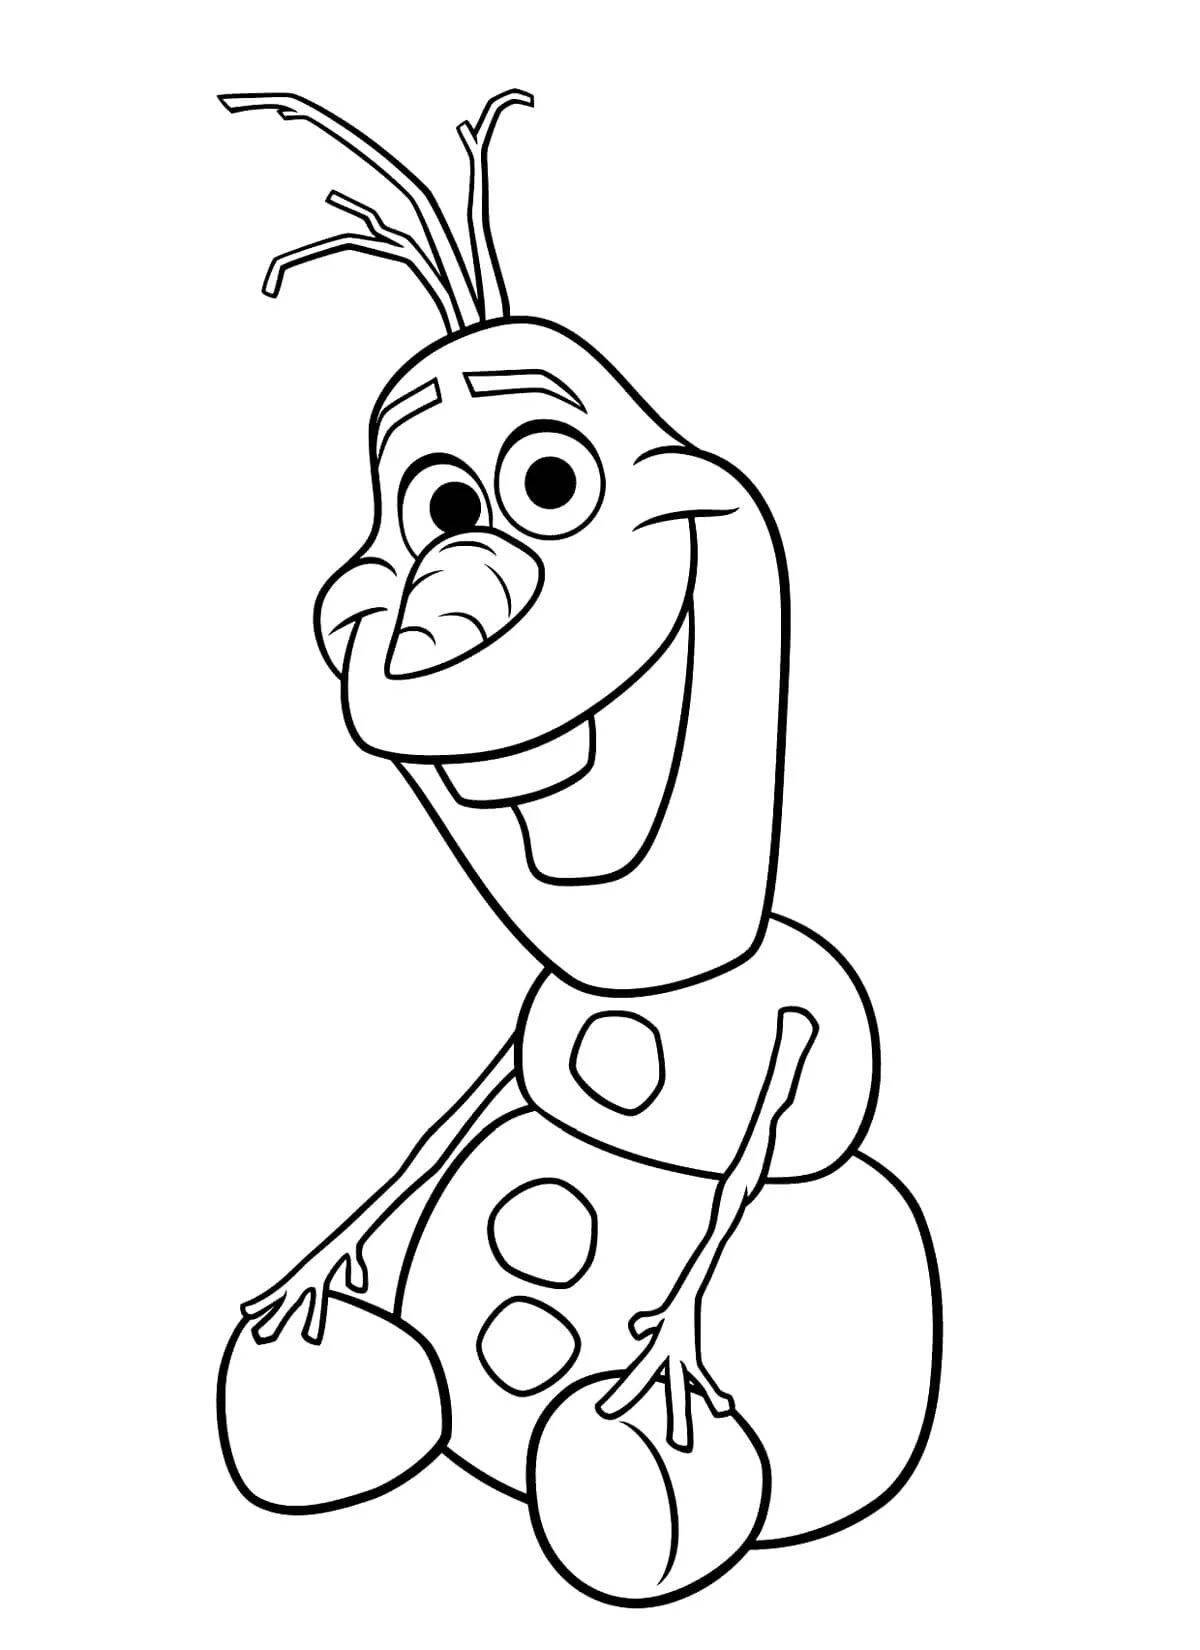 Olaf's awesome coloring book for kids